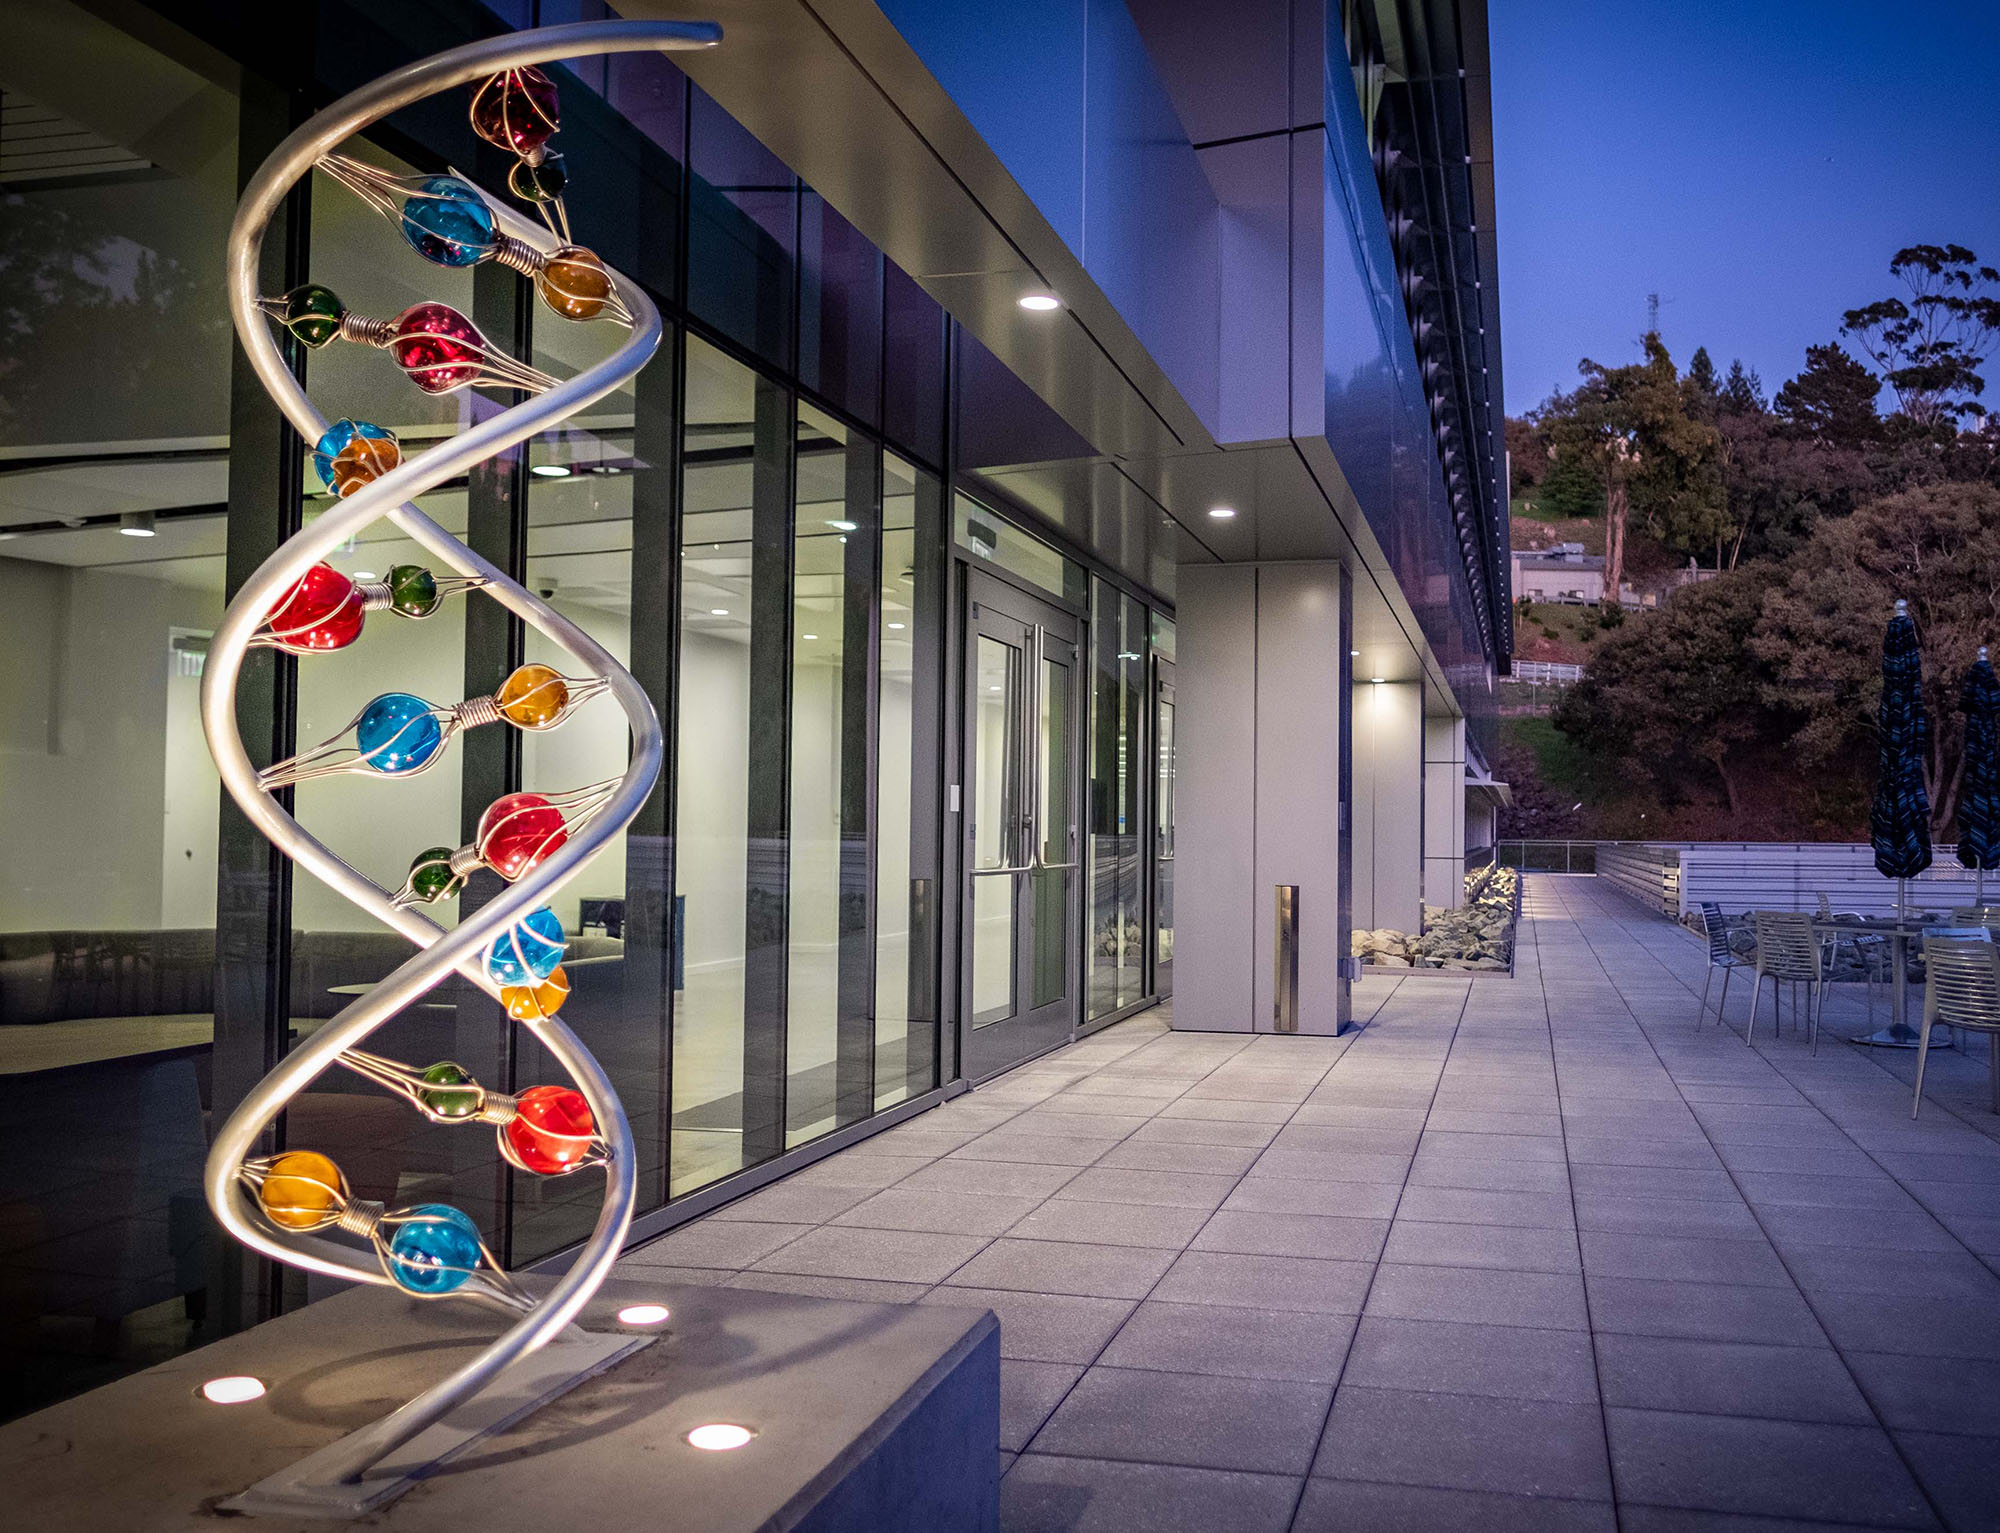 A color sculpture of helix DNA in front of a dusk-bathed building.